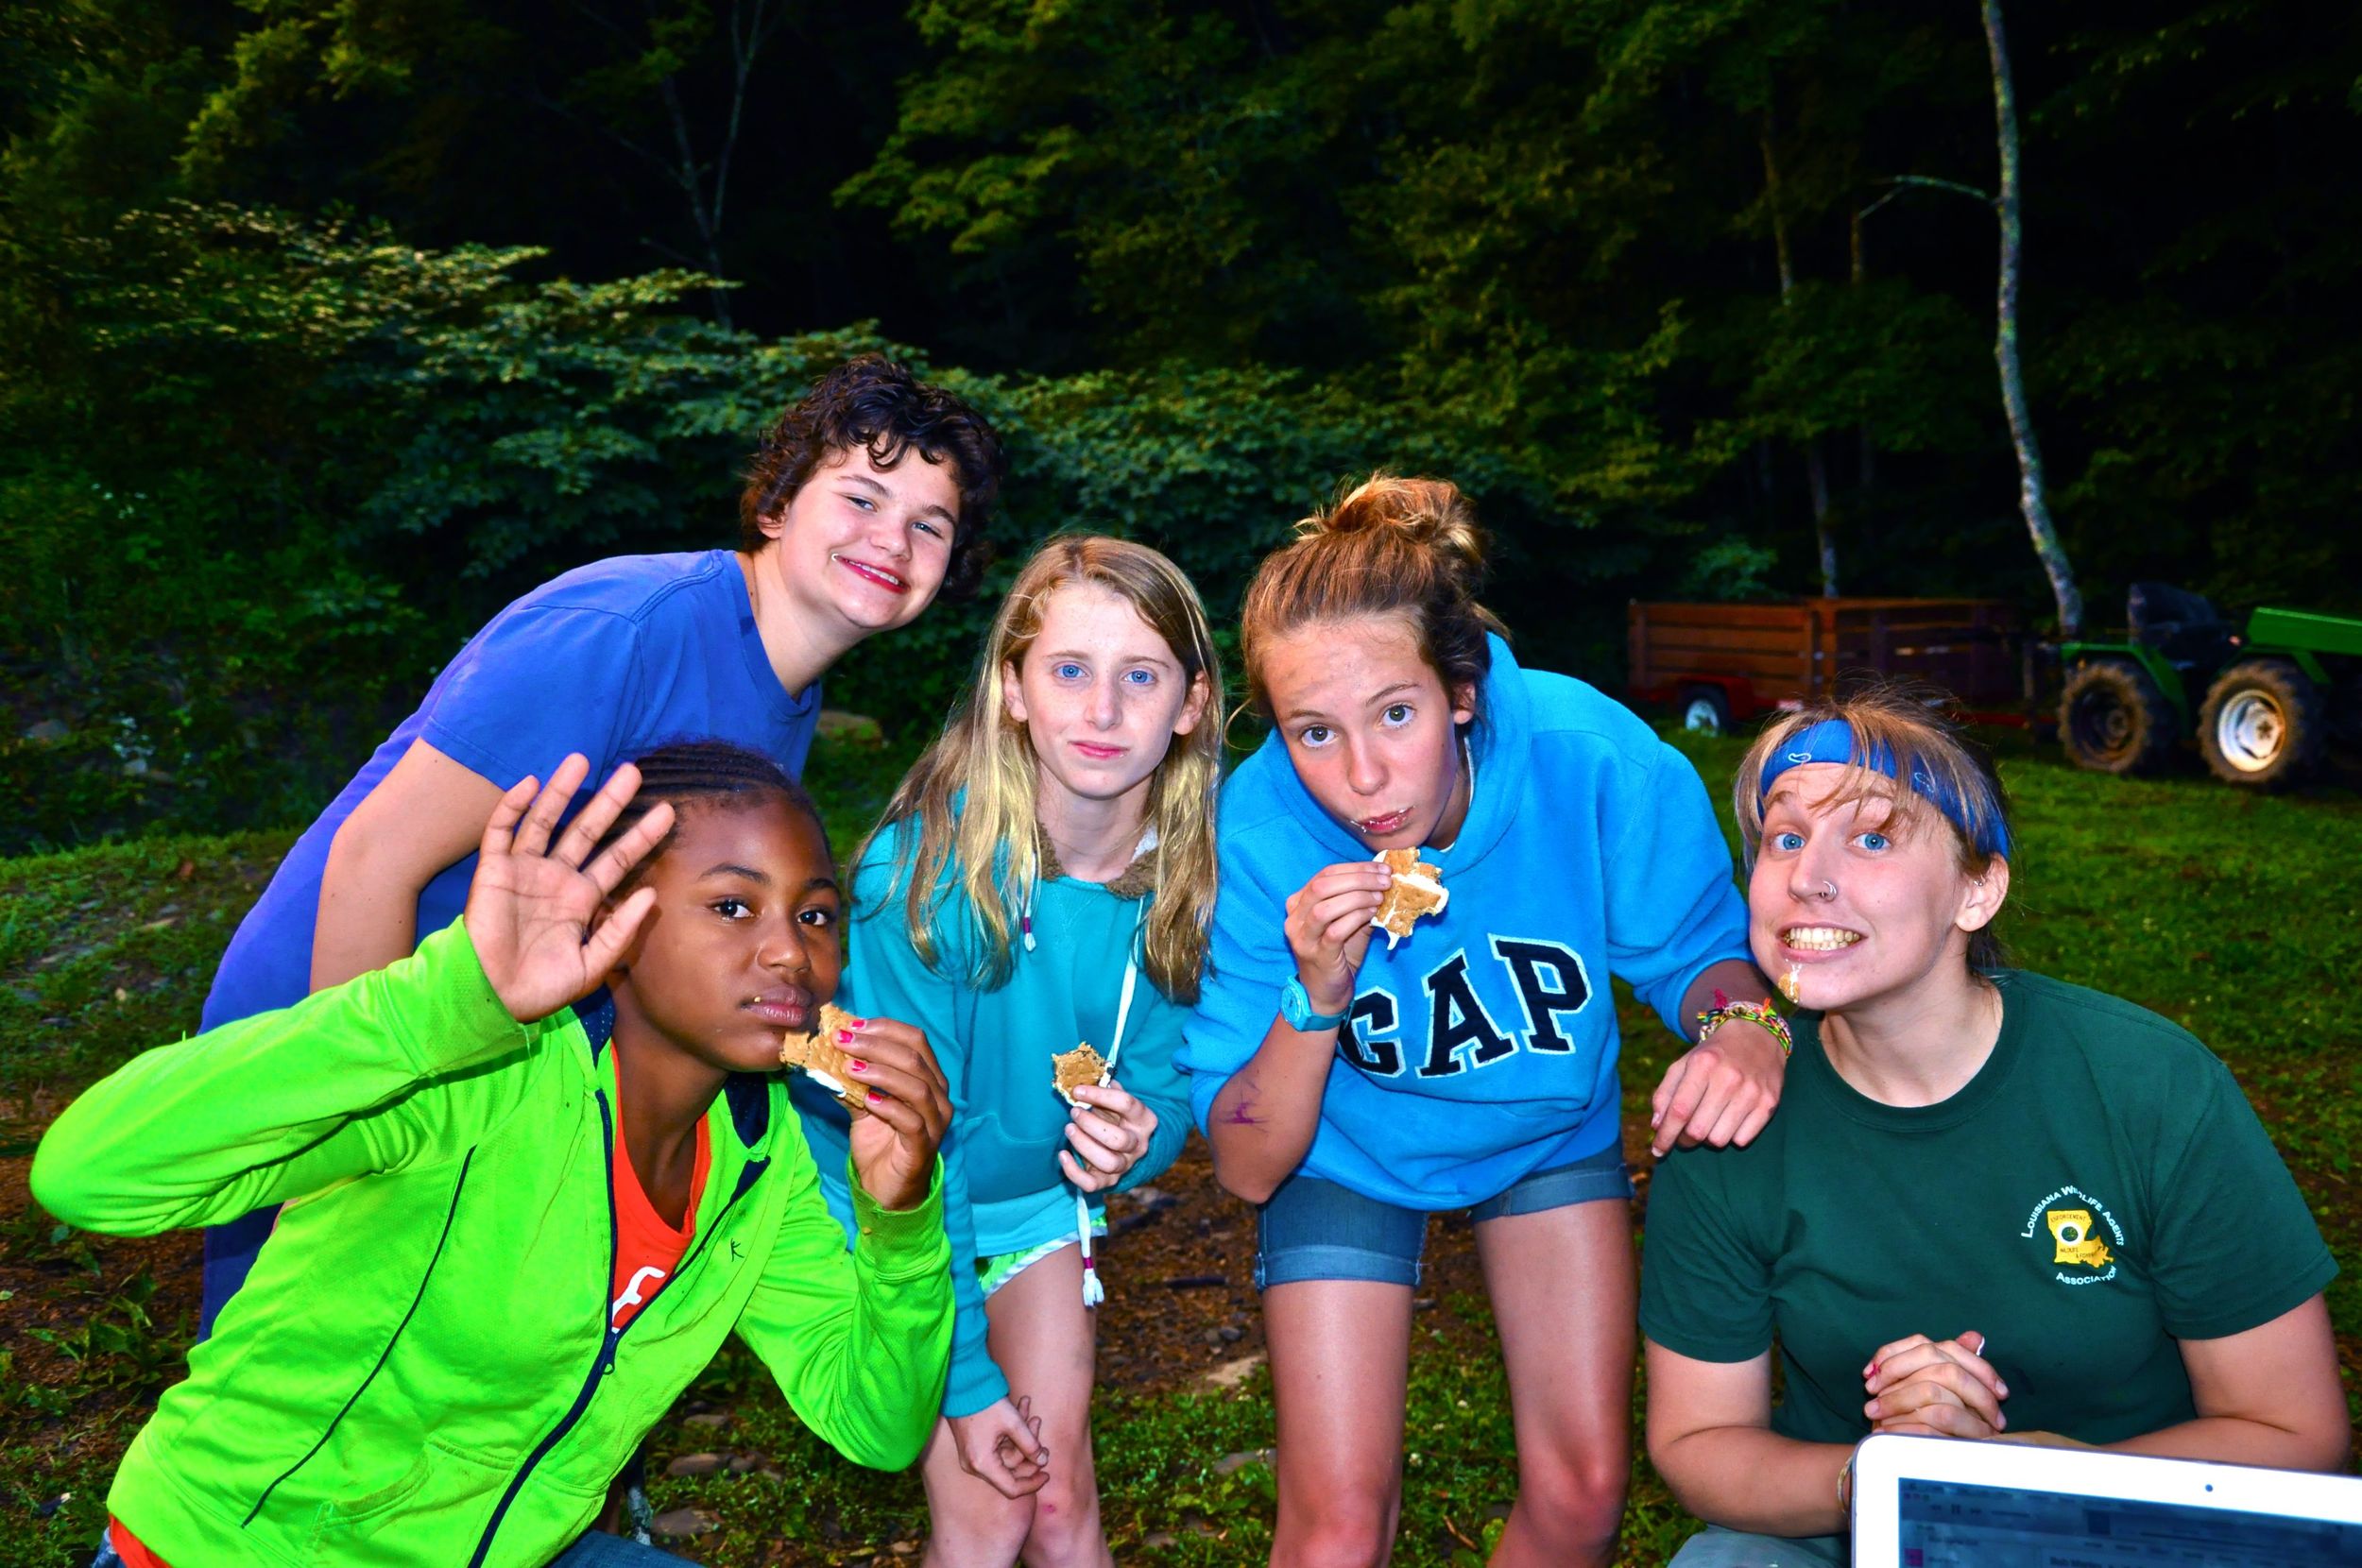 as-a-reward-for-winning-room-inspection-the-senior-girls-chose-to-have-a-bonfire-with-smores.jpg